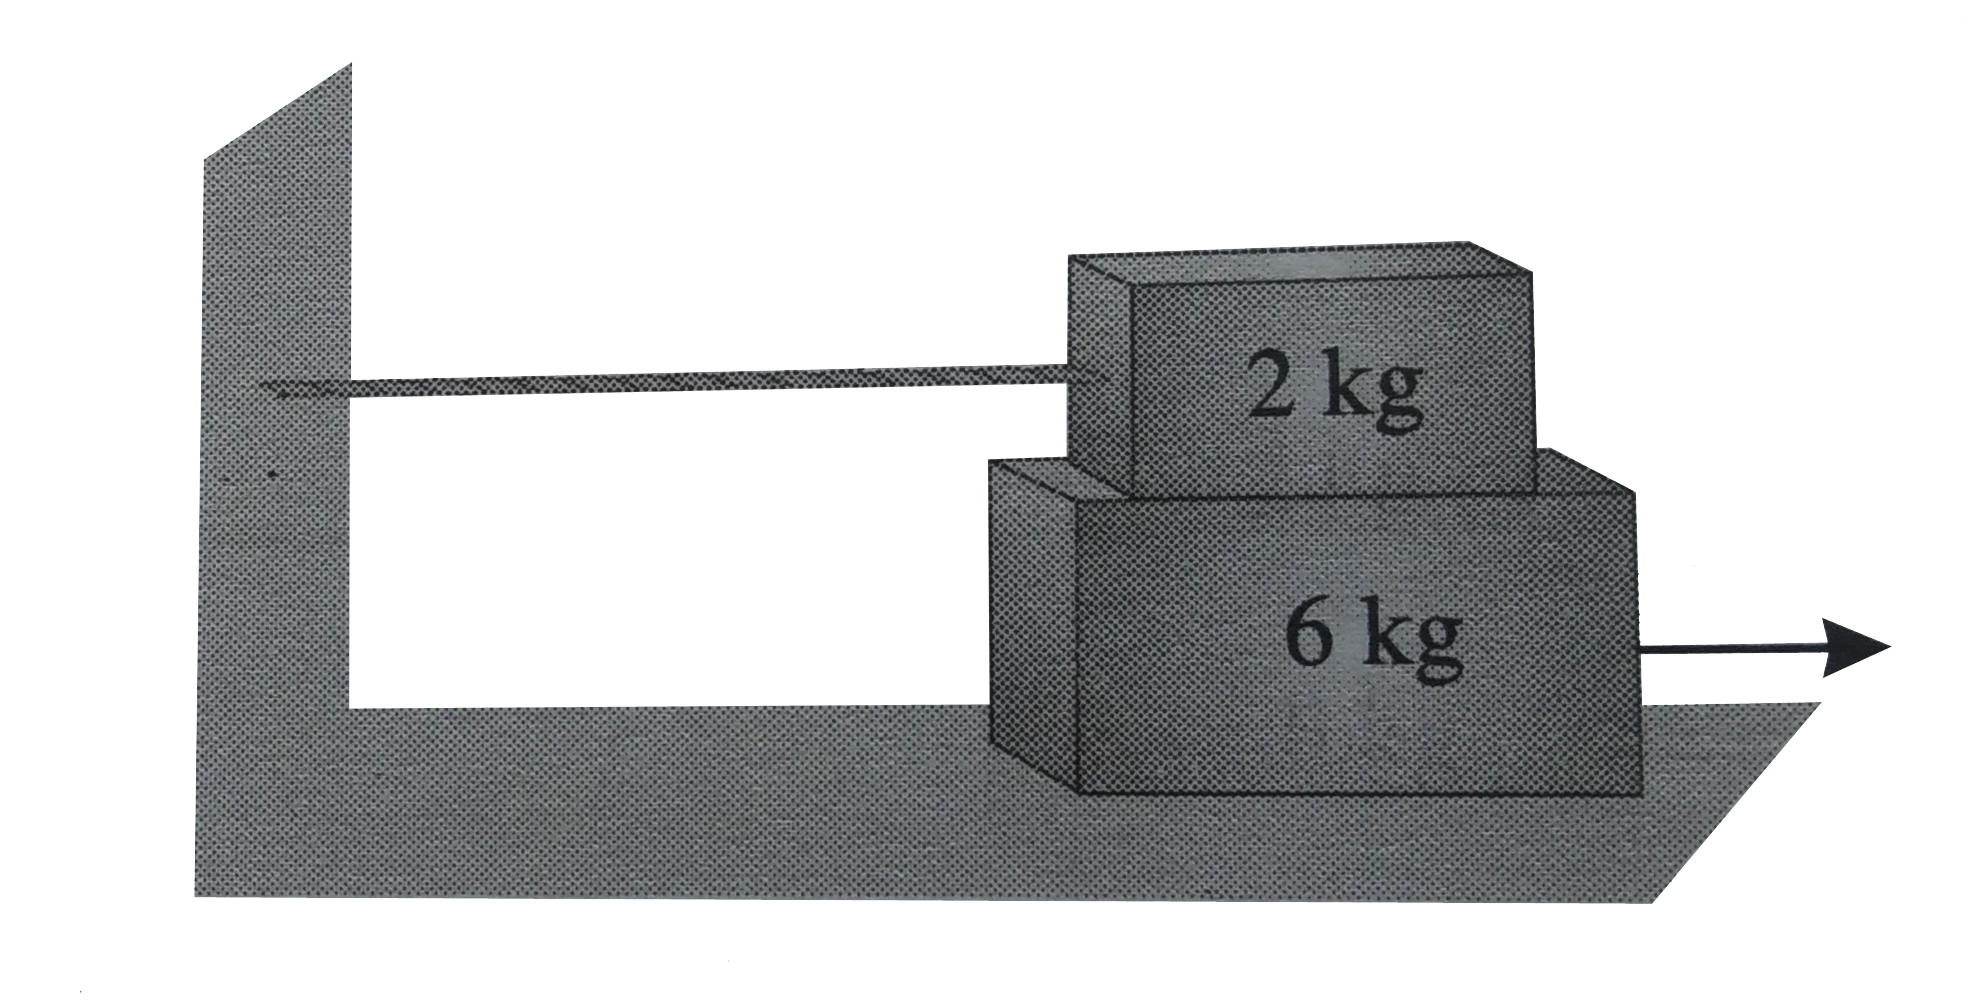 A 40 kg slb rest on a frictionless floor as shown in the figure. A 10 kg block rests on the top of the slab. The static corfficient of friction between the block and slab is 0.60 while the kinetic friction is 0.40 the 10 kg block is acted upon by a horizontal force 100N. If g=9.8(m)/(s^2), the resulting acceleration of the slab will be.